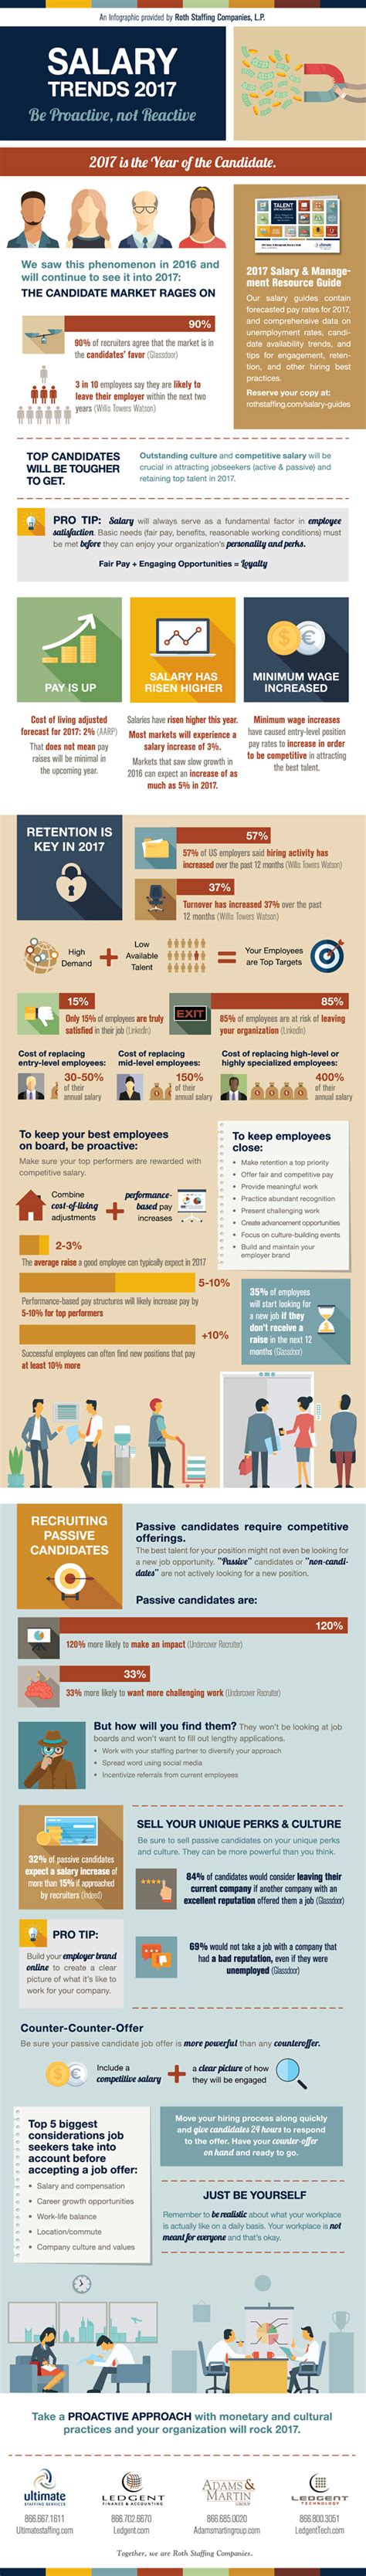 2017 Salary Trends The Year Of The Candidate Infographic Infografía Career Trends